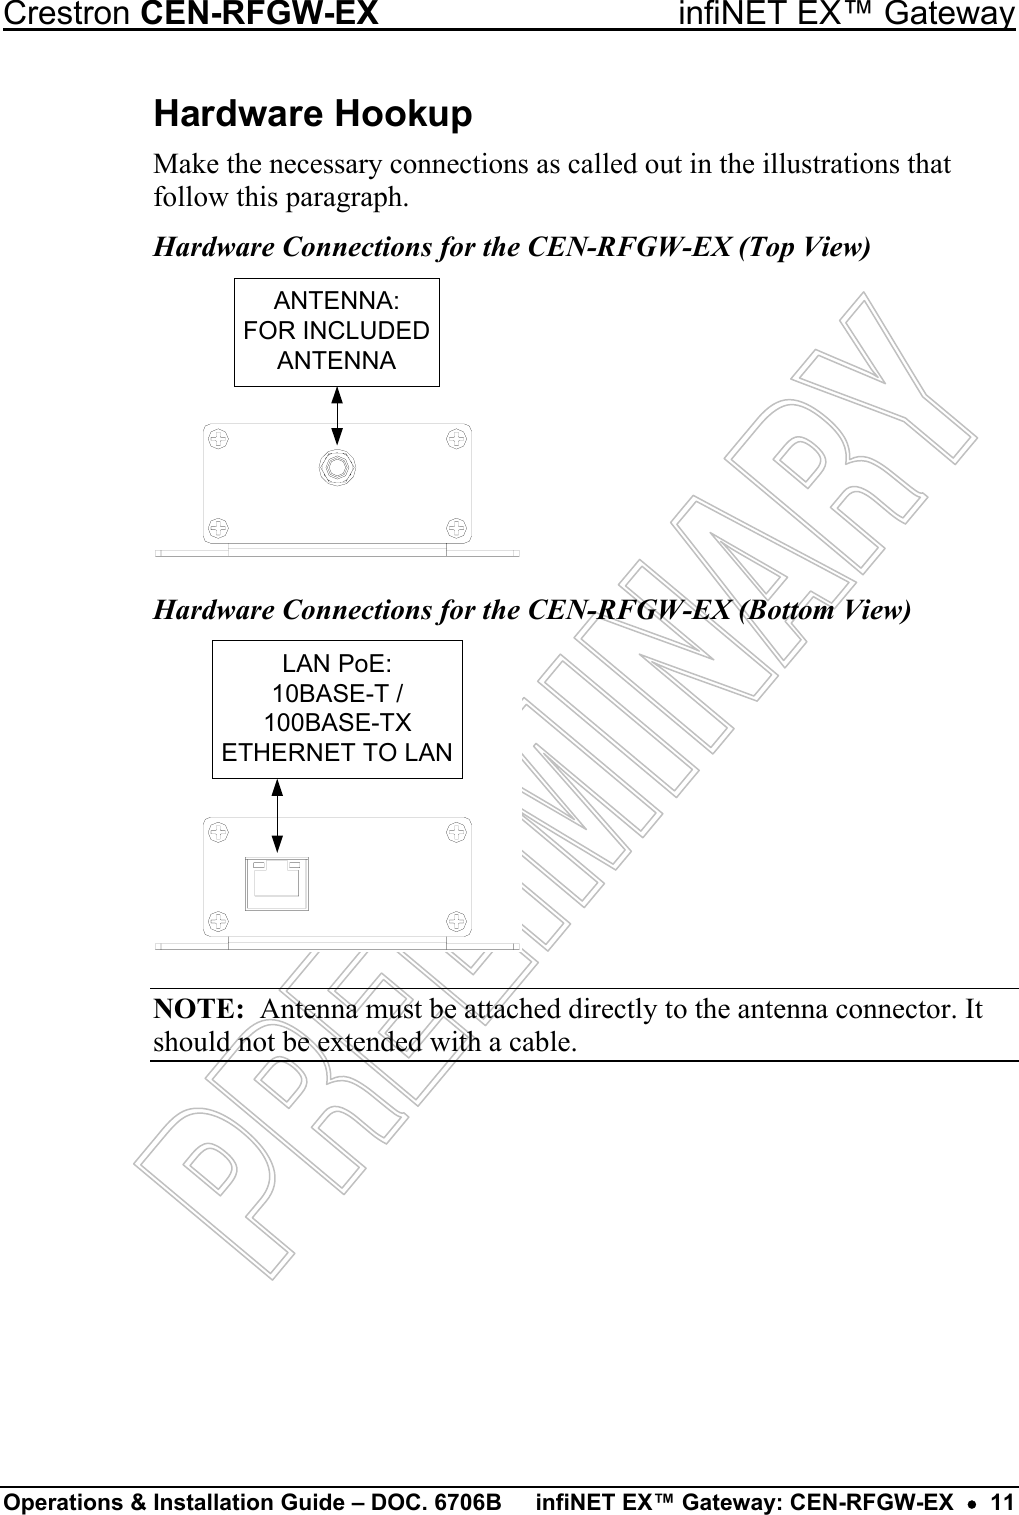  Crestron CEN-RFGW-EX  infiNET EX™ Gateway Operations &amp; Installation Guide – DOC. 6706B  infiNET EX™ Gateway: CEN-RFGW-EX  •  11 Hardware Hookup Make the necessary connections as called out in the illustrations that follow this paragraph. Hardware Connections for the CEN-RFGW-EX (Top View) ANTENNA:FOR INCLUDEDANTENNA Hardware Connections for the CEN-RFGW-EX (Bottom View) LAN PoE:10BASE-T /100BASE-TXETHERNET TO LANNOTE:  Antenna must be attached directly to the antenna connector. It should not be extended with a cable. 